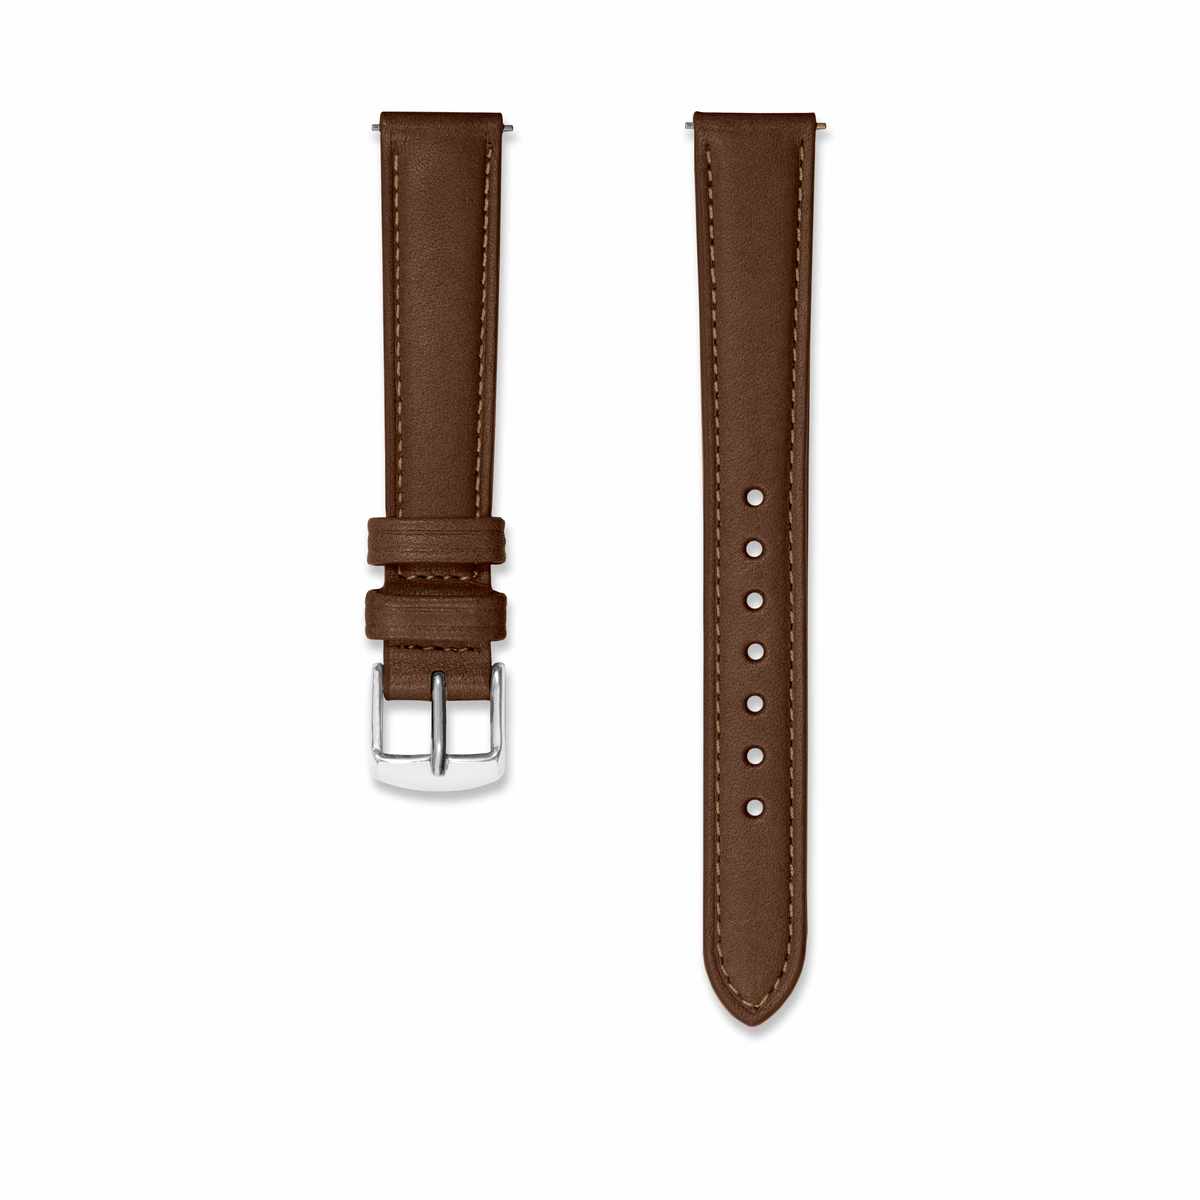 Chocolate leather strap 14mm